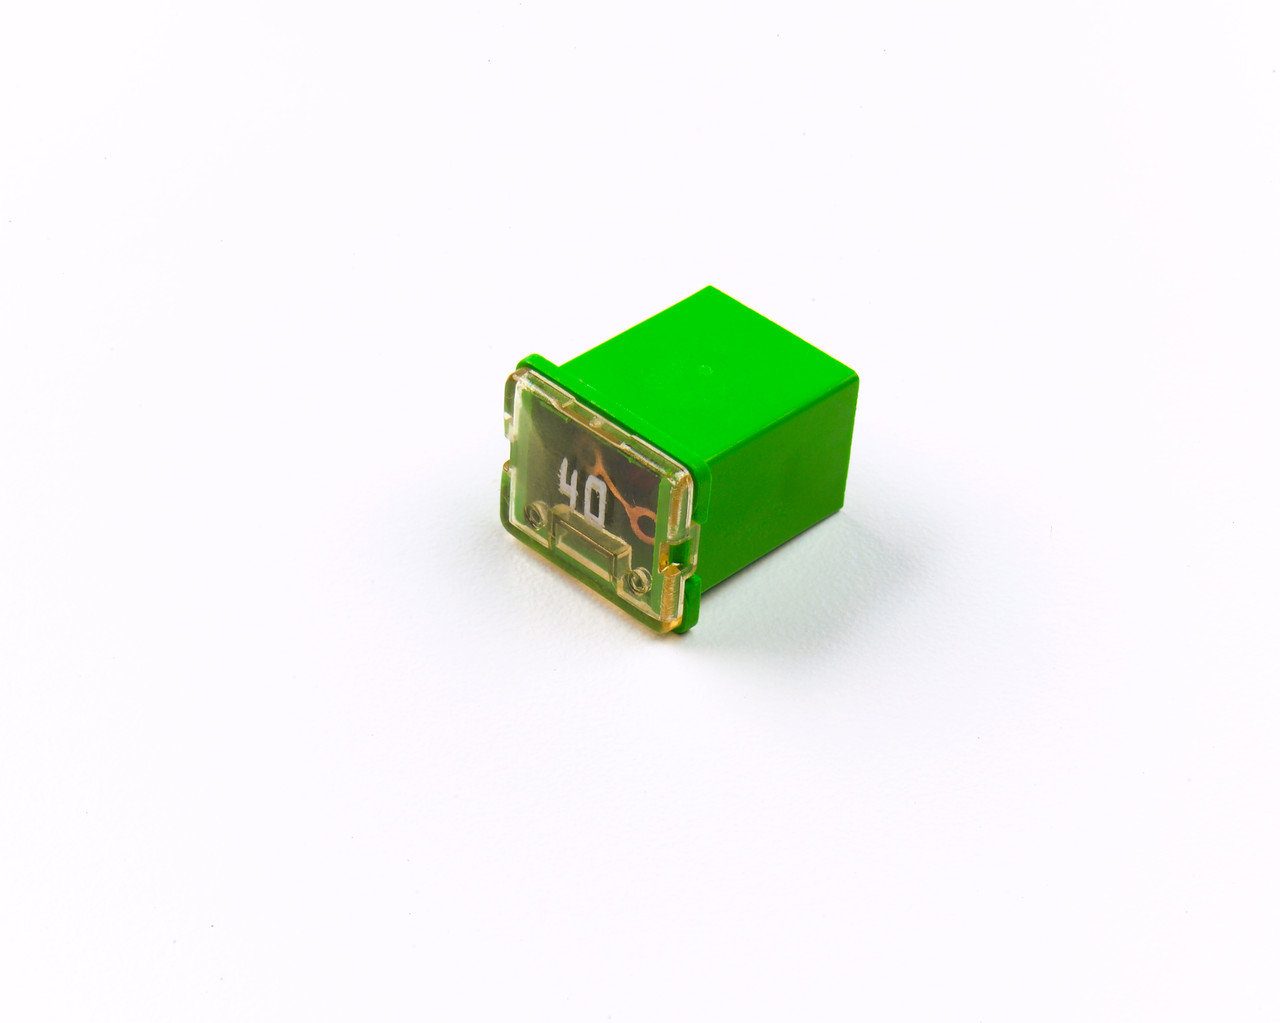 Cartridge "Link" Fuse Low Profile 40A 32V - Green  82-FMXLP-40A